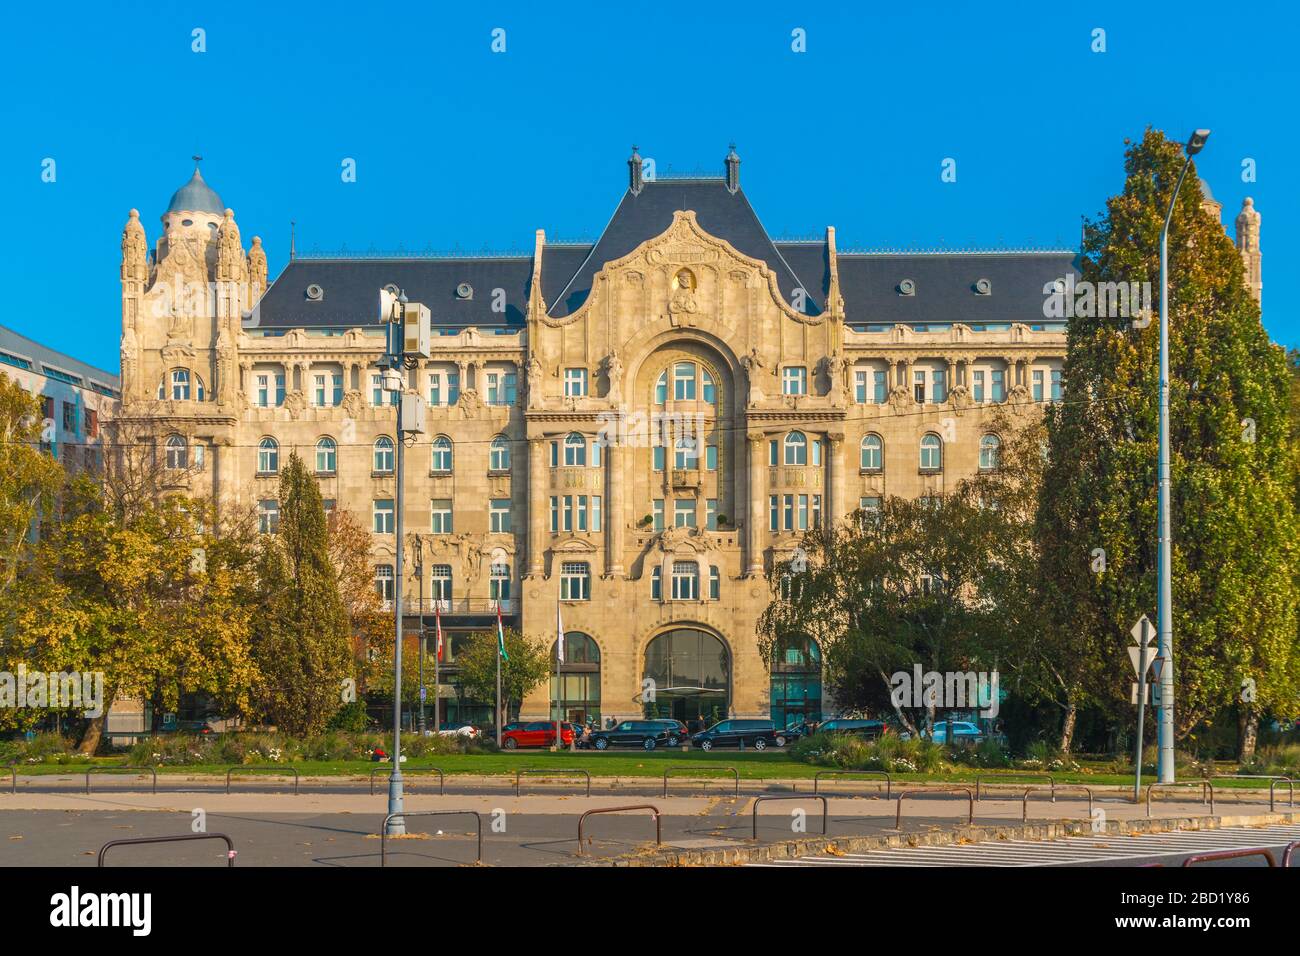 Budapest, Hungary - November 11, 2018: The old building of the Gresham palace in Budapest Stock Photo